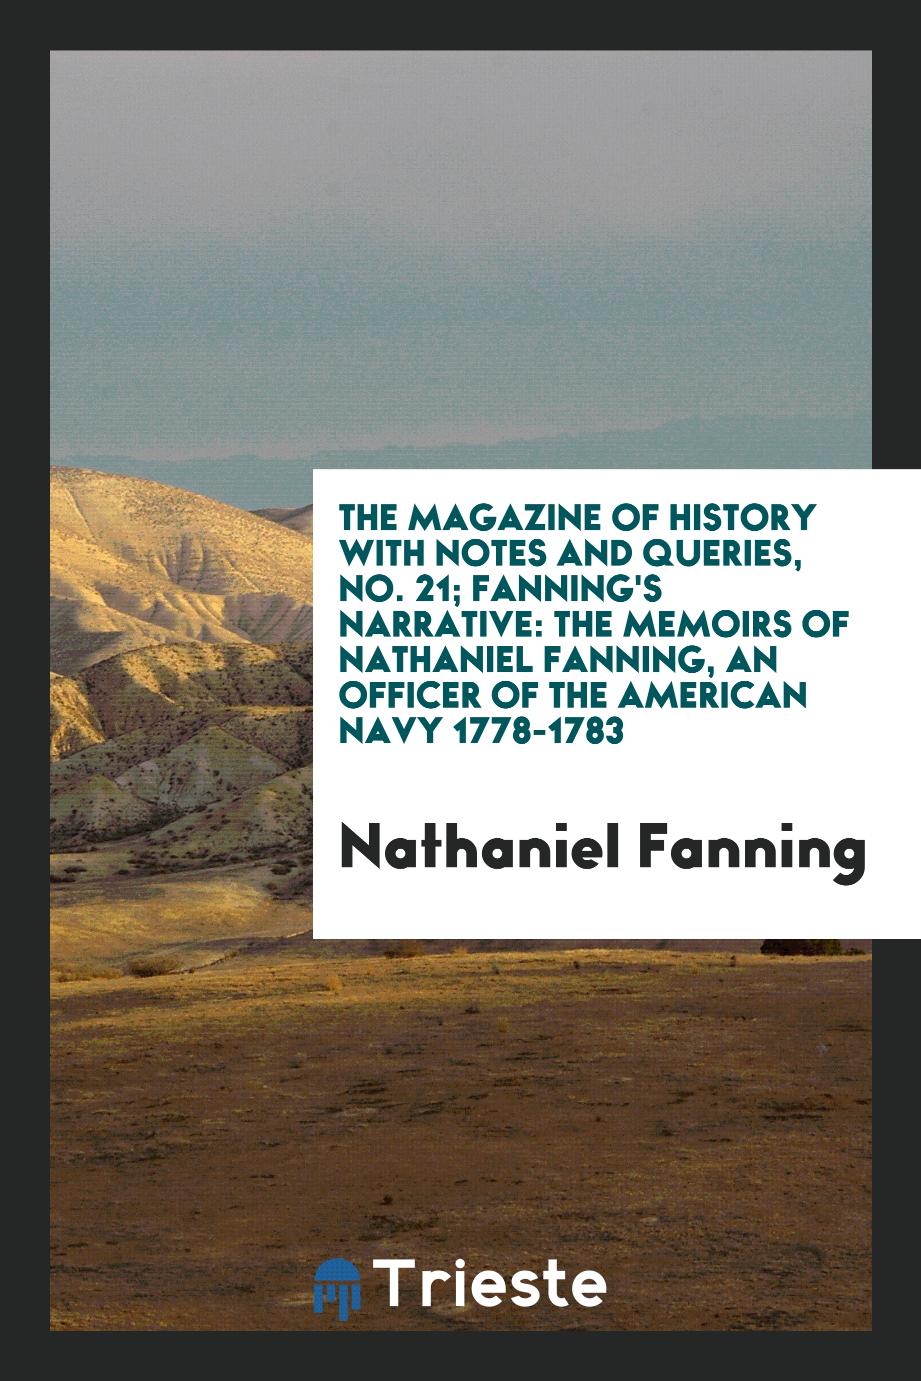 The magazine of history with notes and queries, No. 21; Fanning's narrative: the memoirs of Nathaniel Fanning, an officer of the American navy 1778-1783